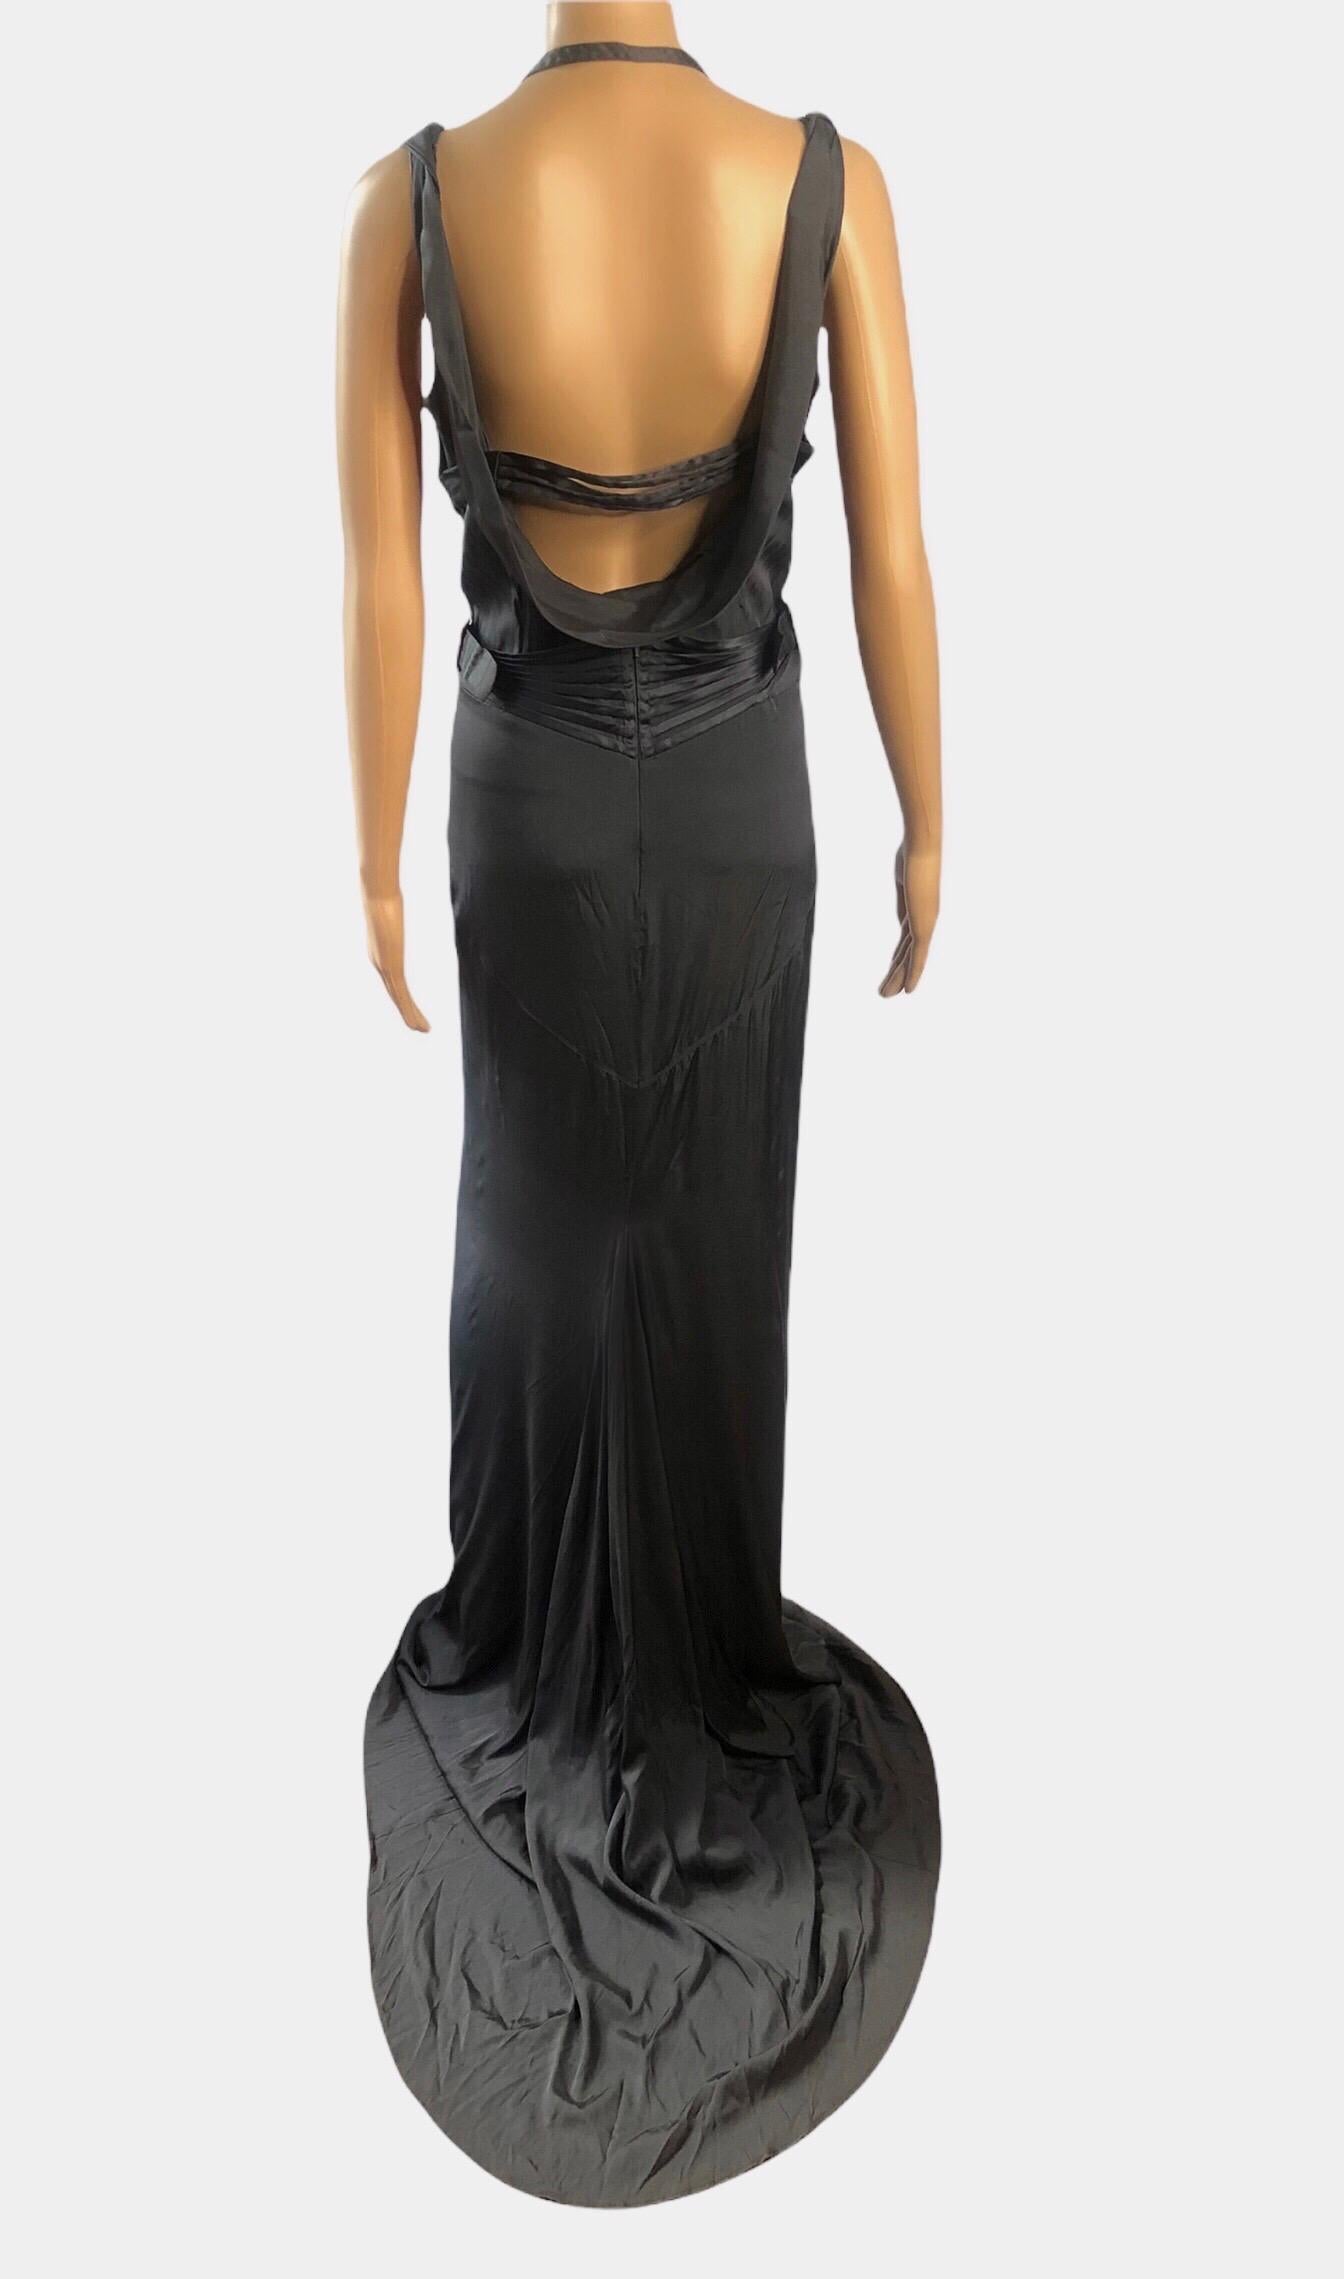 Tom Ford for Gucci F/W 2003 Bustier Corset Silk Evening Dress Gown 7